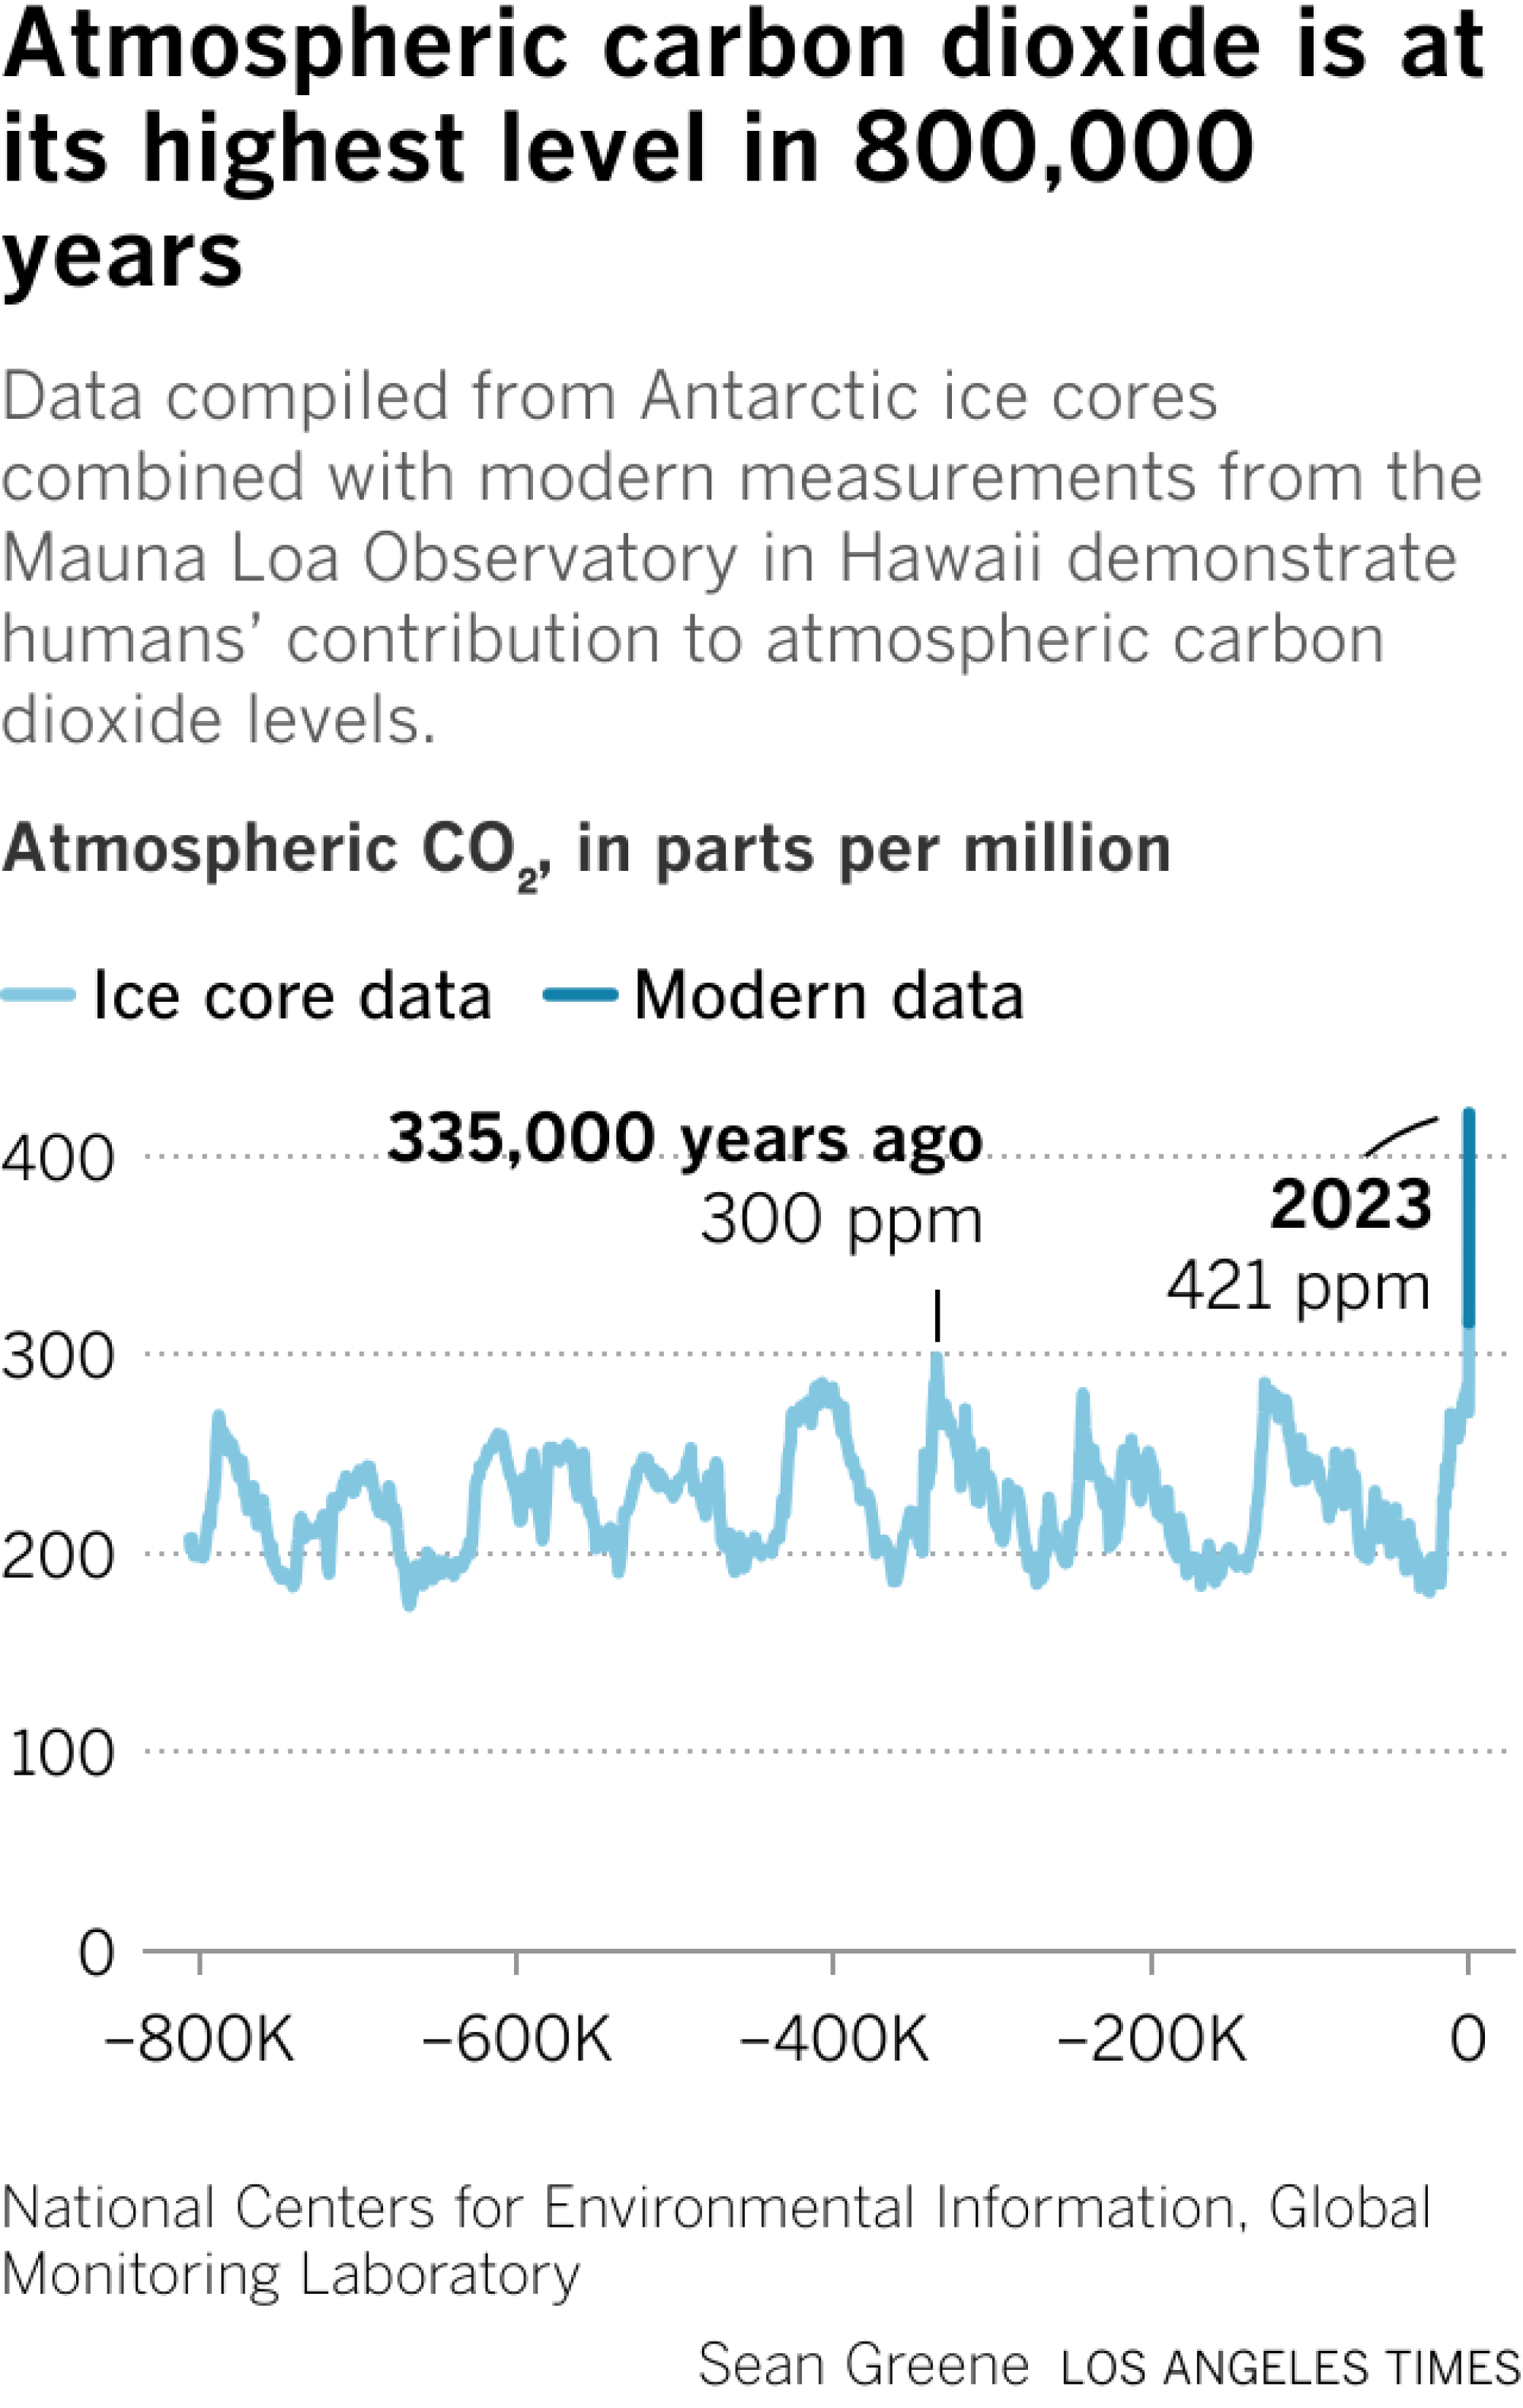 A line graph shows atmospheric carbon dioxide levels over the past 800,000 years.  CO2 last peaked 335,000 years ago at 300 parts per million.  In recent decades, the concentration has climbed to 421 parts per million.